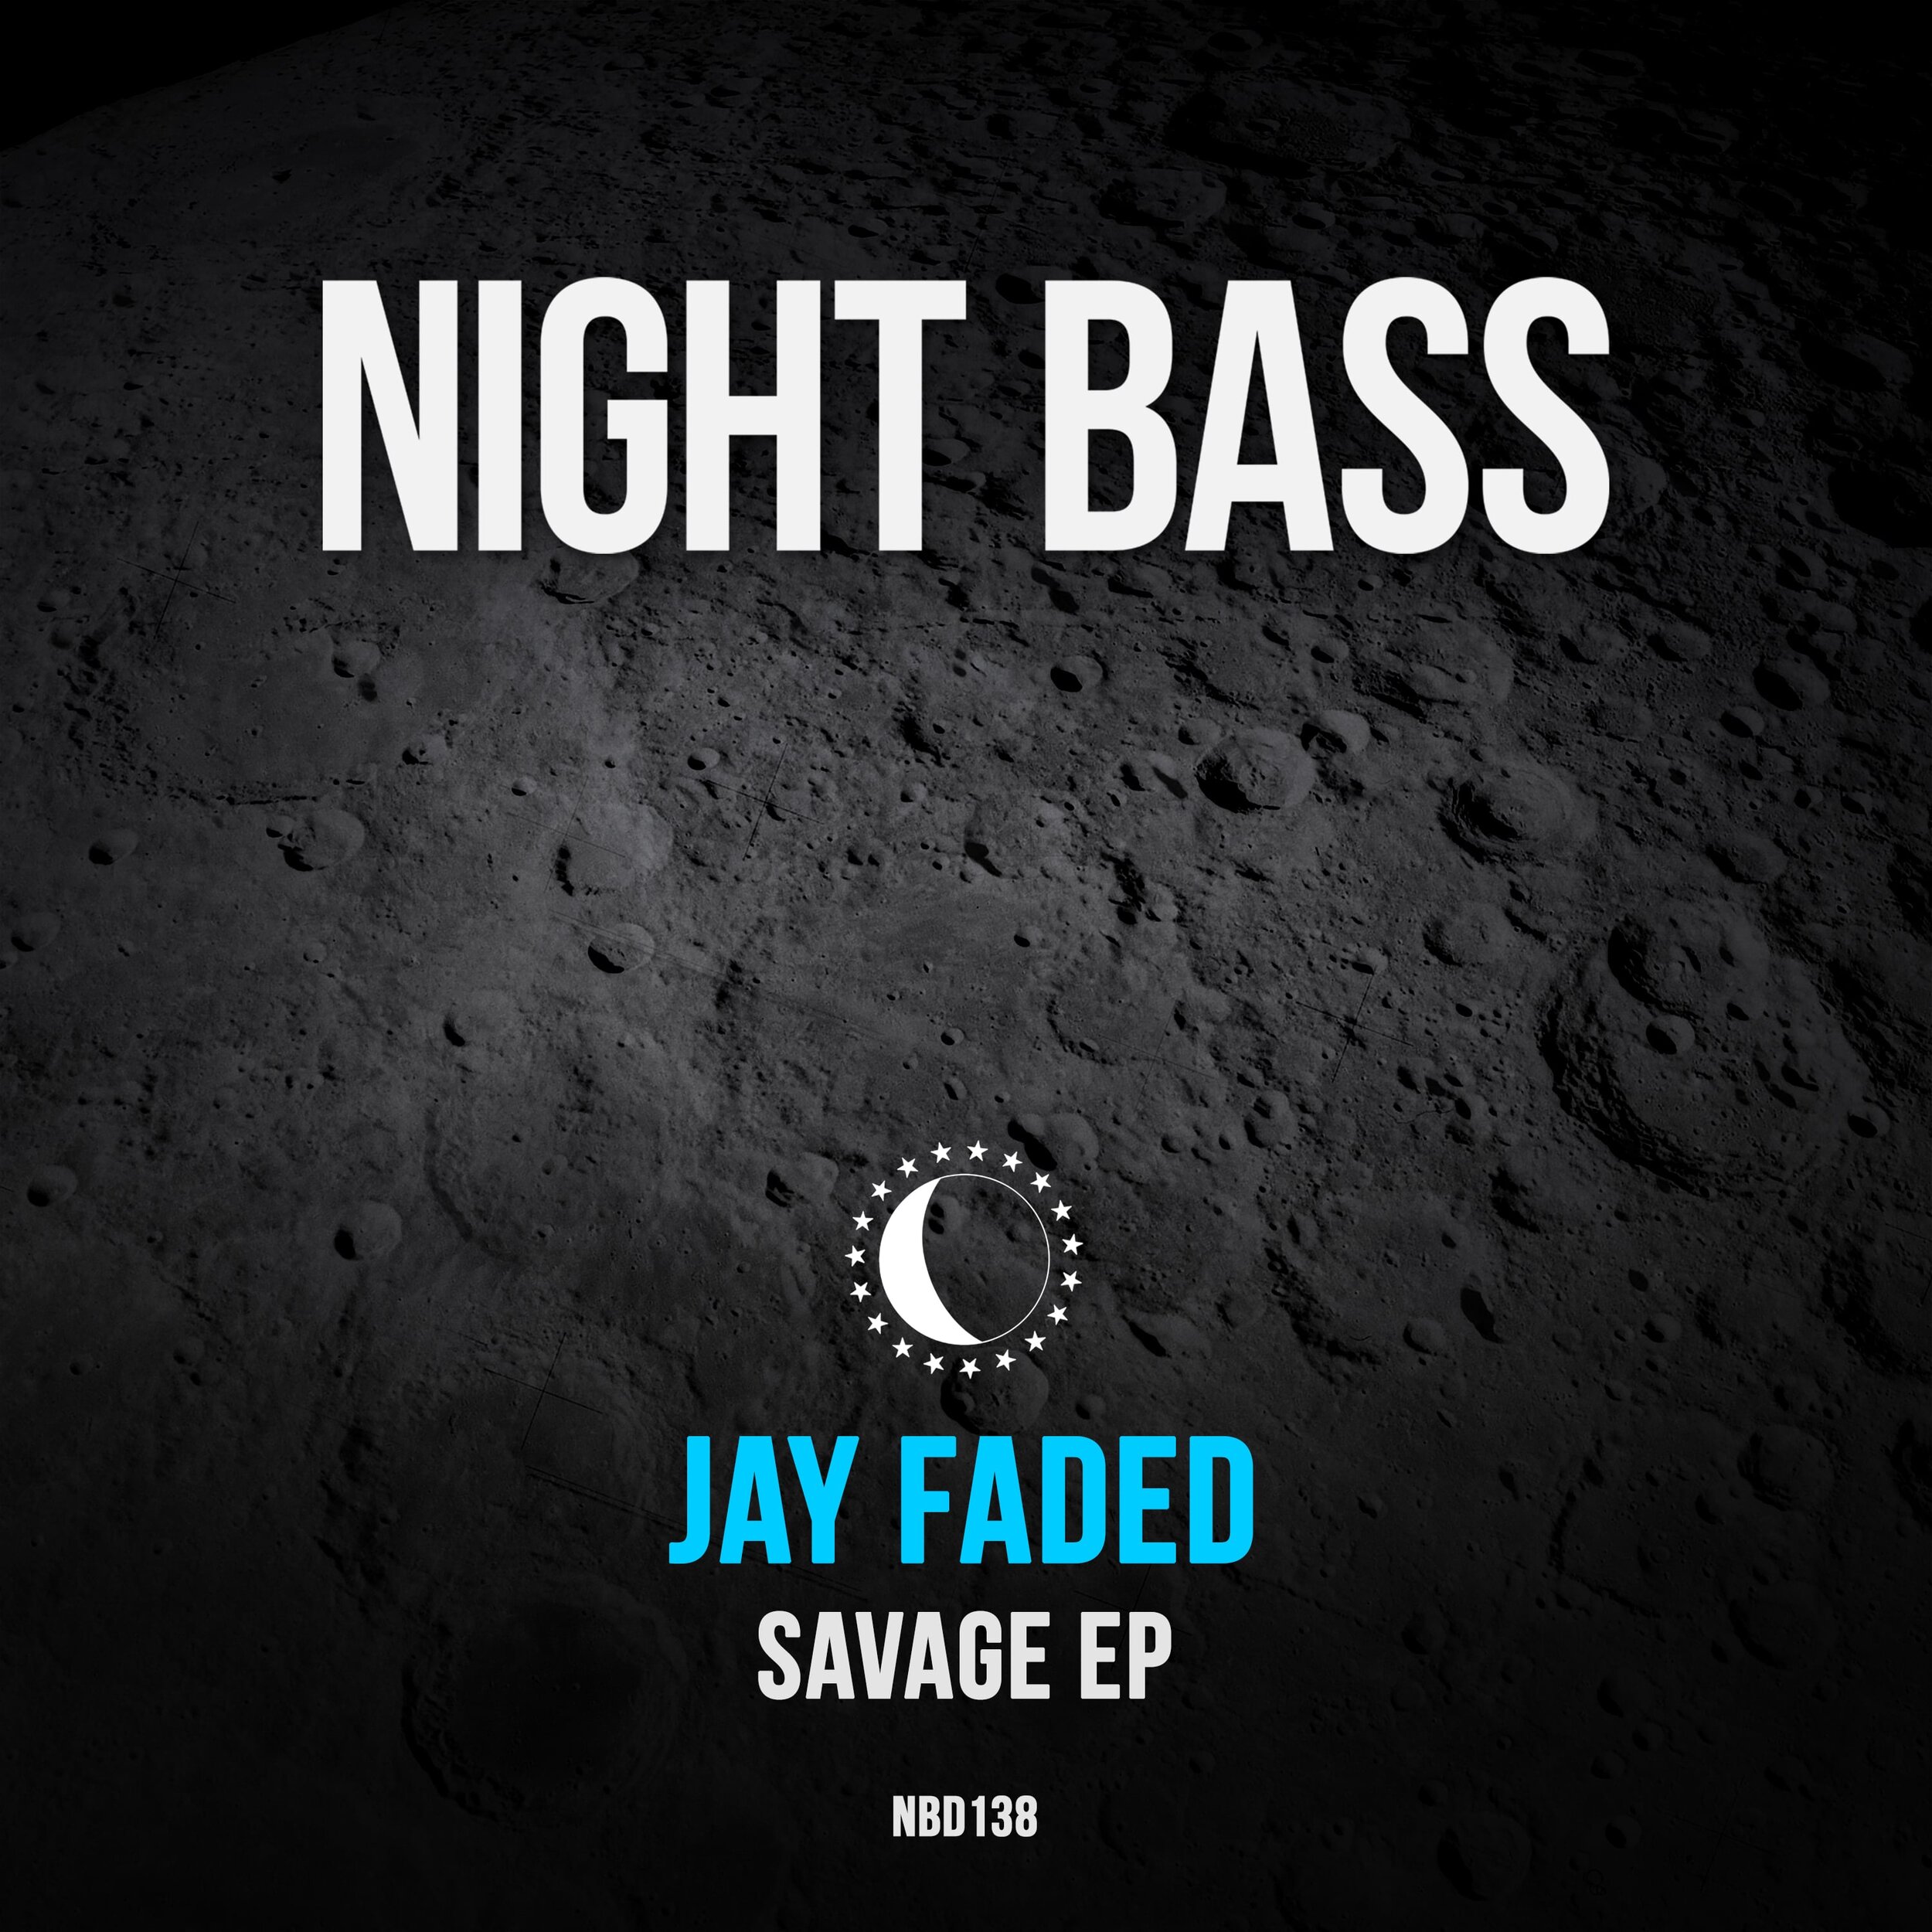 Jay-Faded-Savage-EP-Out-Now-Night-Bass-Records-Artwork.jpg